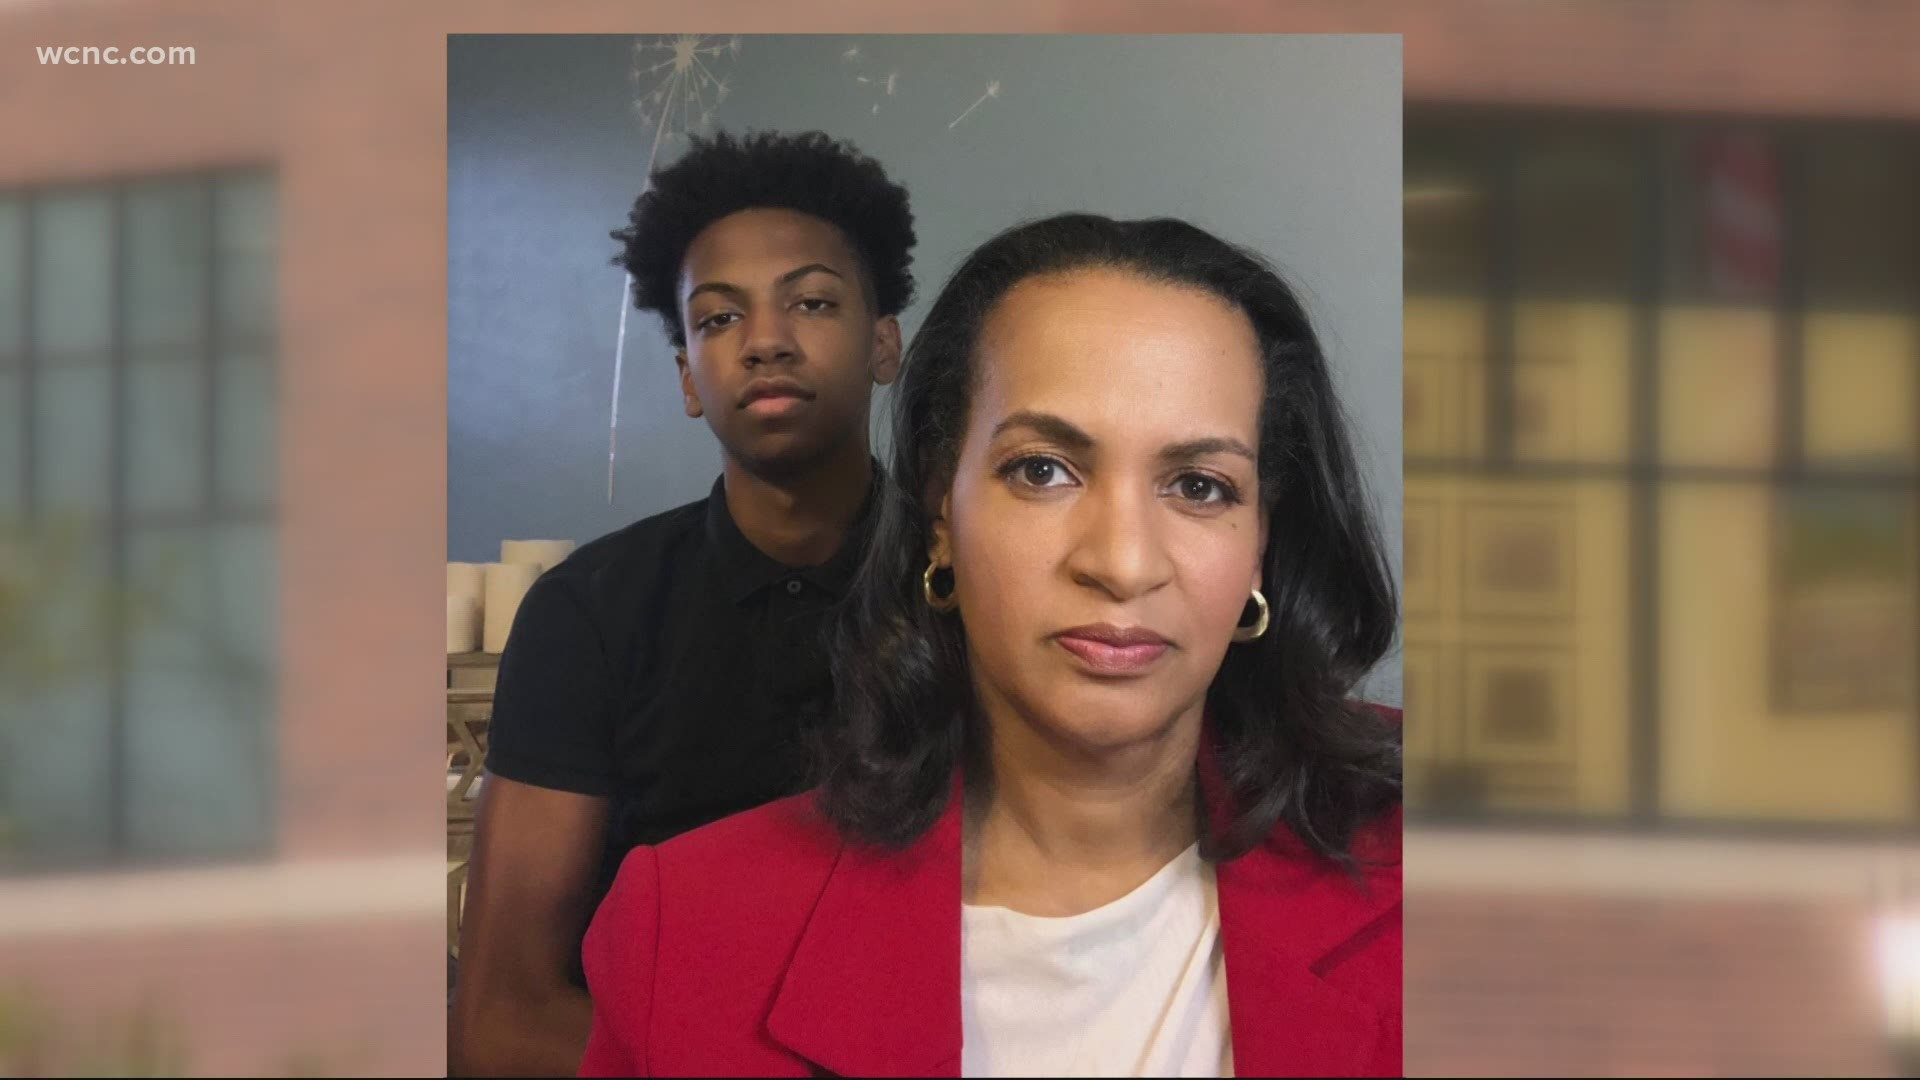 She's hoping things will change at Providence Day School, a private school her son, Jamel, attended for 10 years until he was kicked out the day after Thanksgiving.